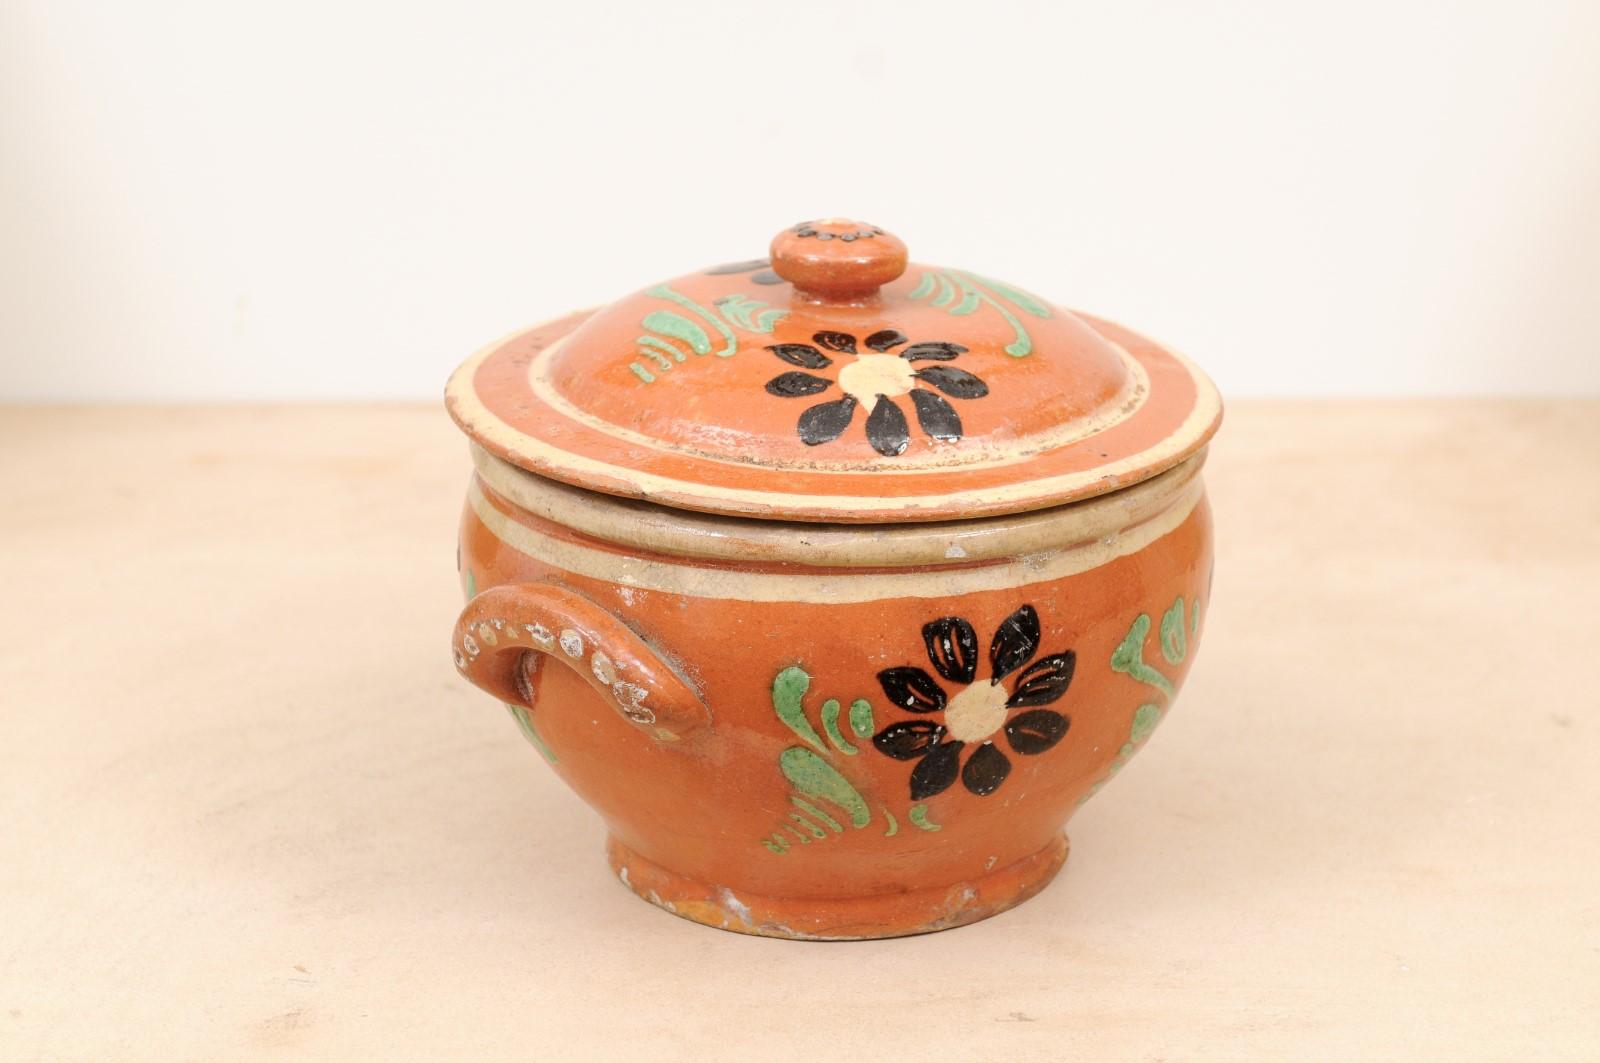 Rustic French 19th Century Glazed Terracotta Covered Baking Dish with Flowers For Sale 2